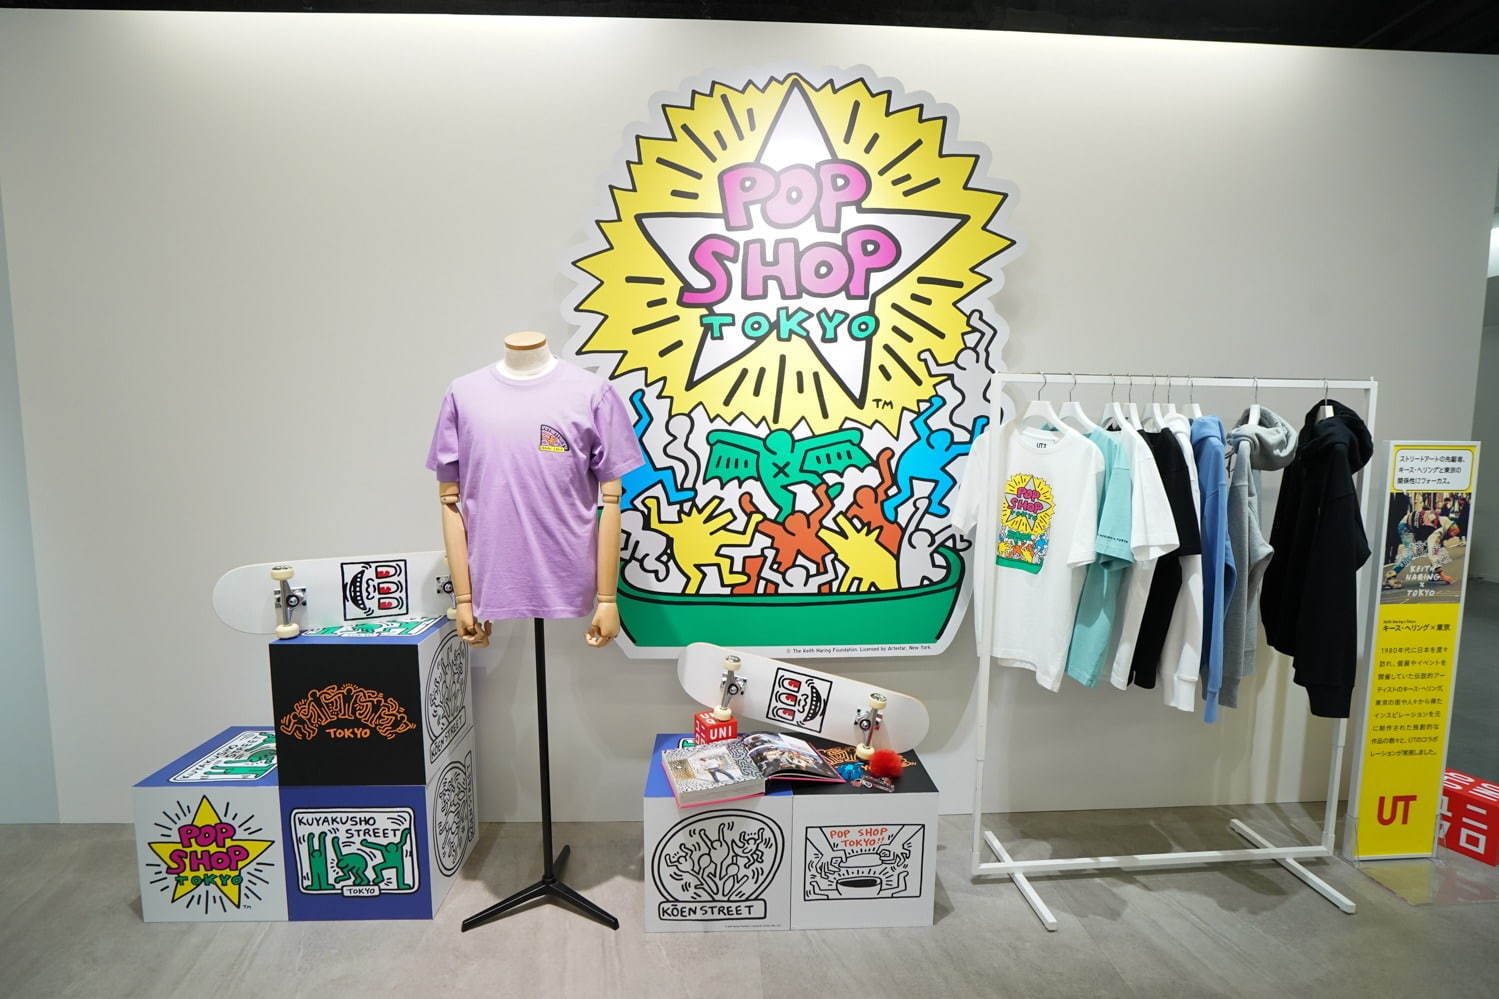 © The Keith Haring Foundation. Licensed by Artestar, New York.